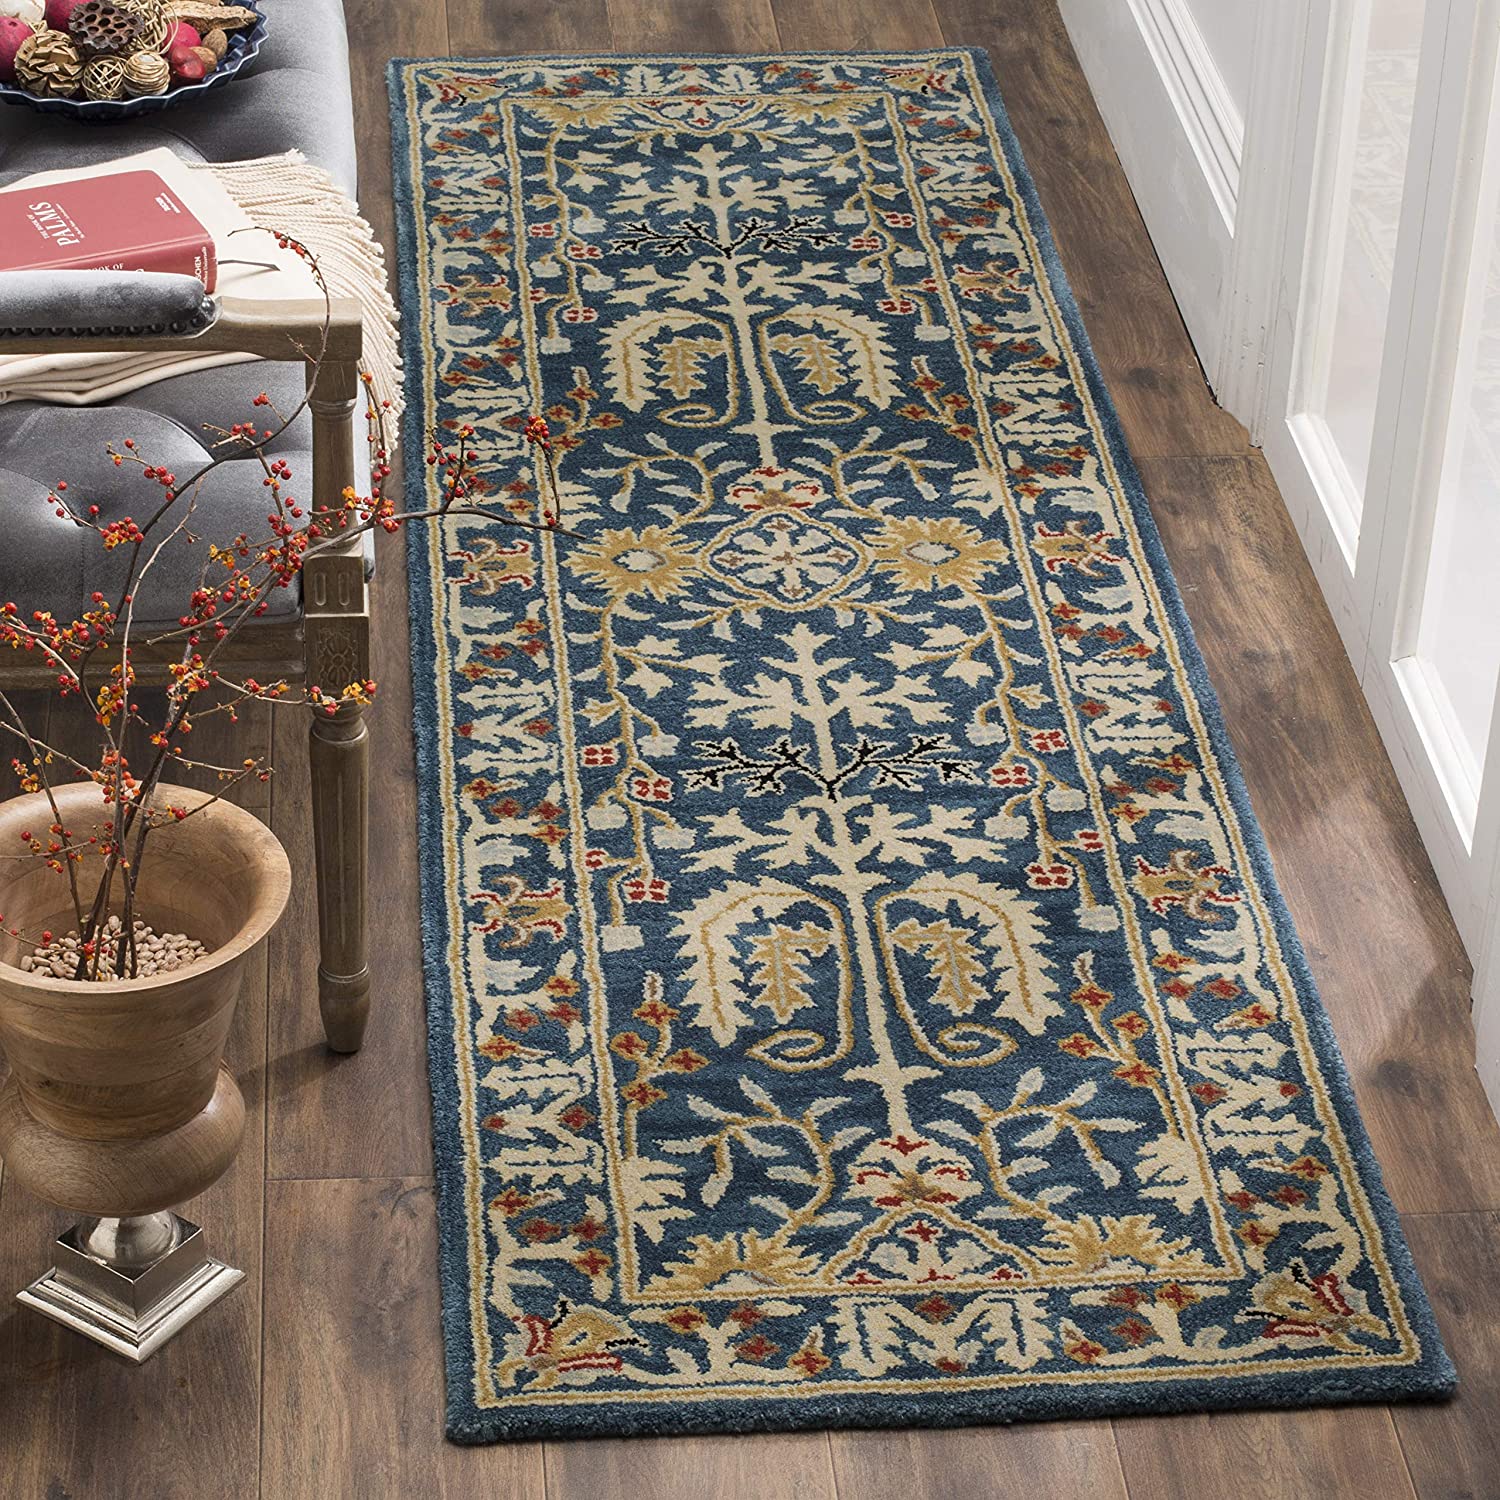 SAFAVIEH Antiquity Collection 2'6" x 5' Green Gold AT52K Handmade  Traditional Oriental Premium Wool Area Rug